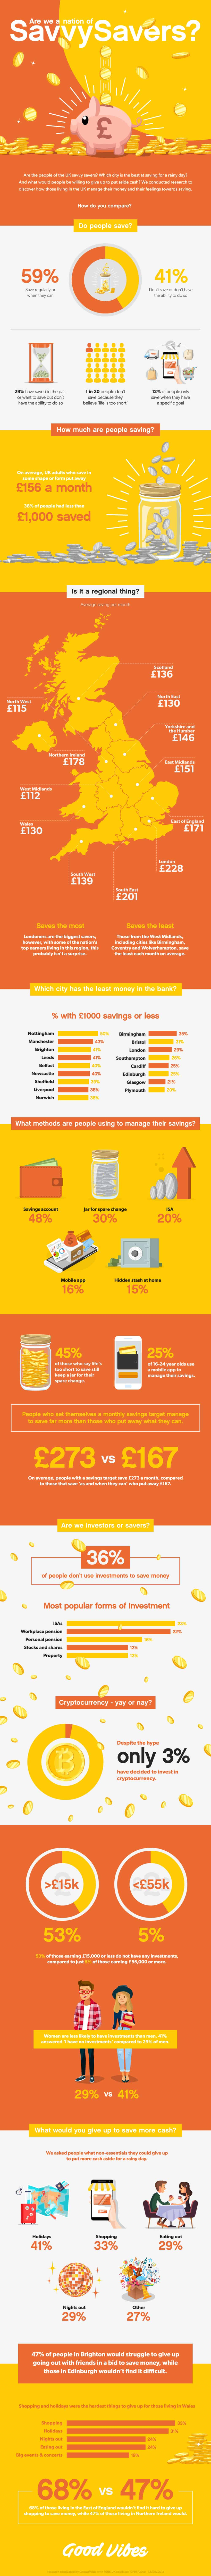 An infographic showing how people in the UK manage their savings